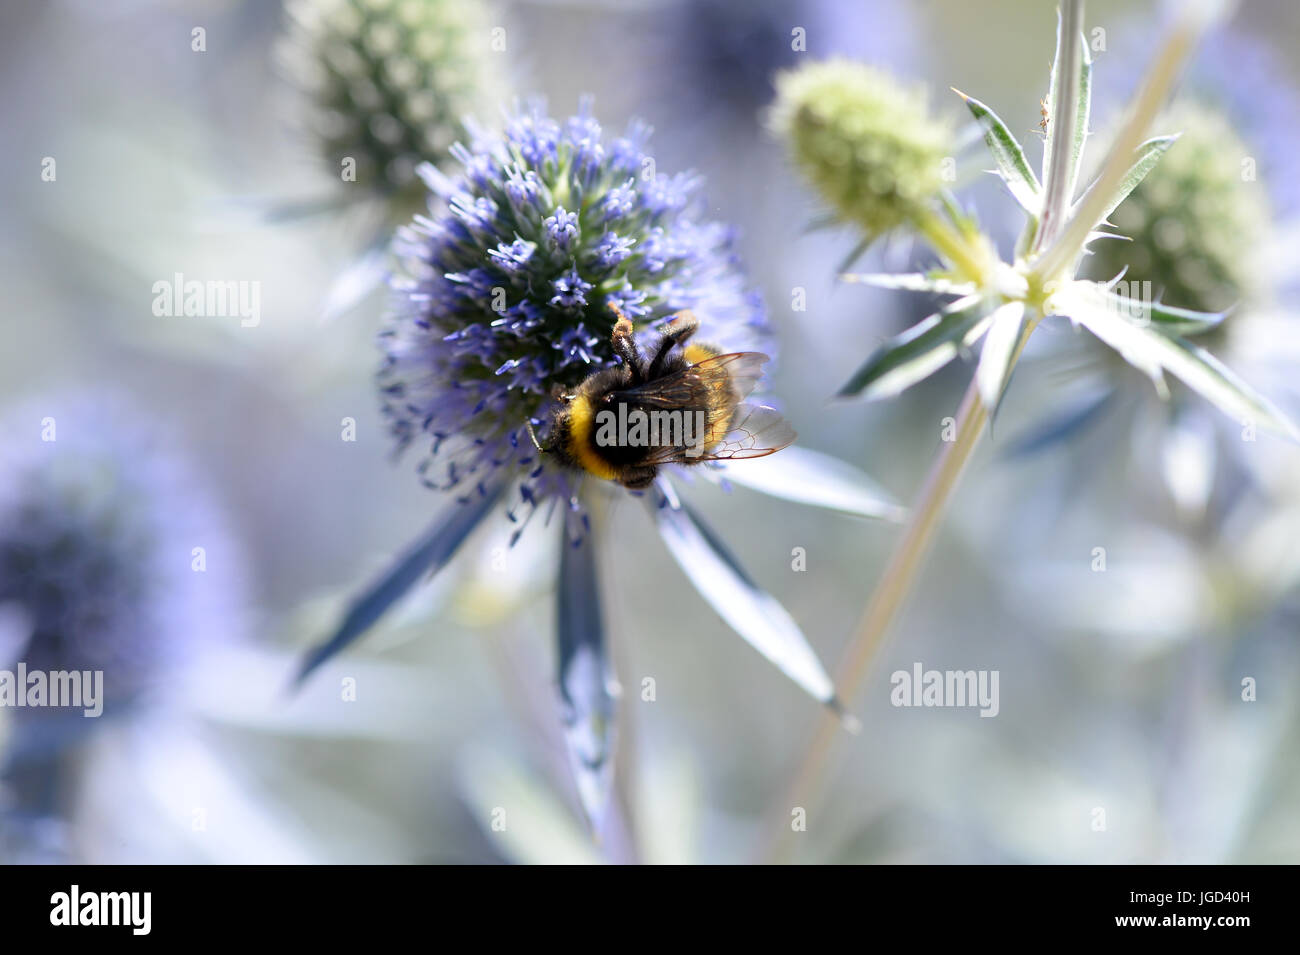 Bee feeds on nectar an eryngium also known as  eryngo and amethyst sea holly Stock Photo